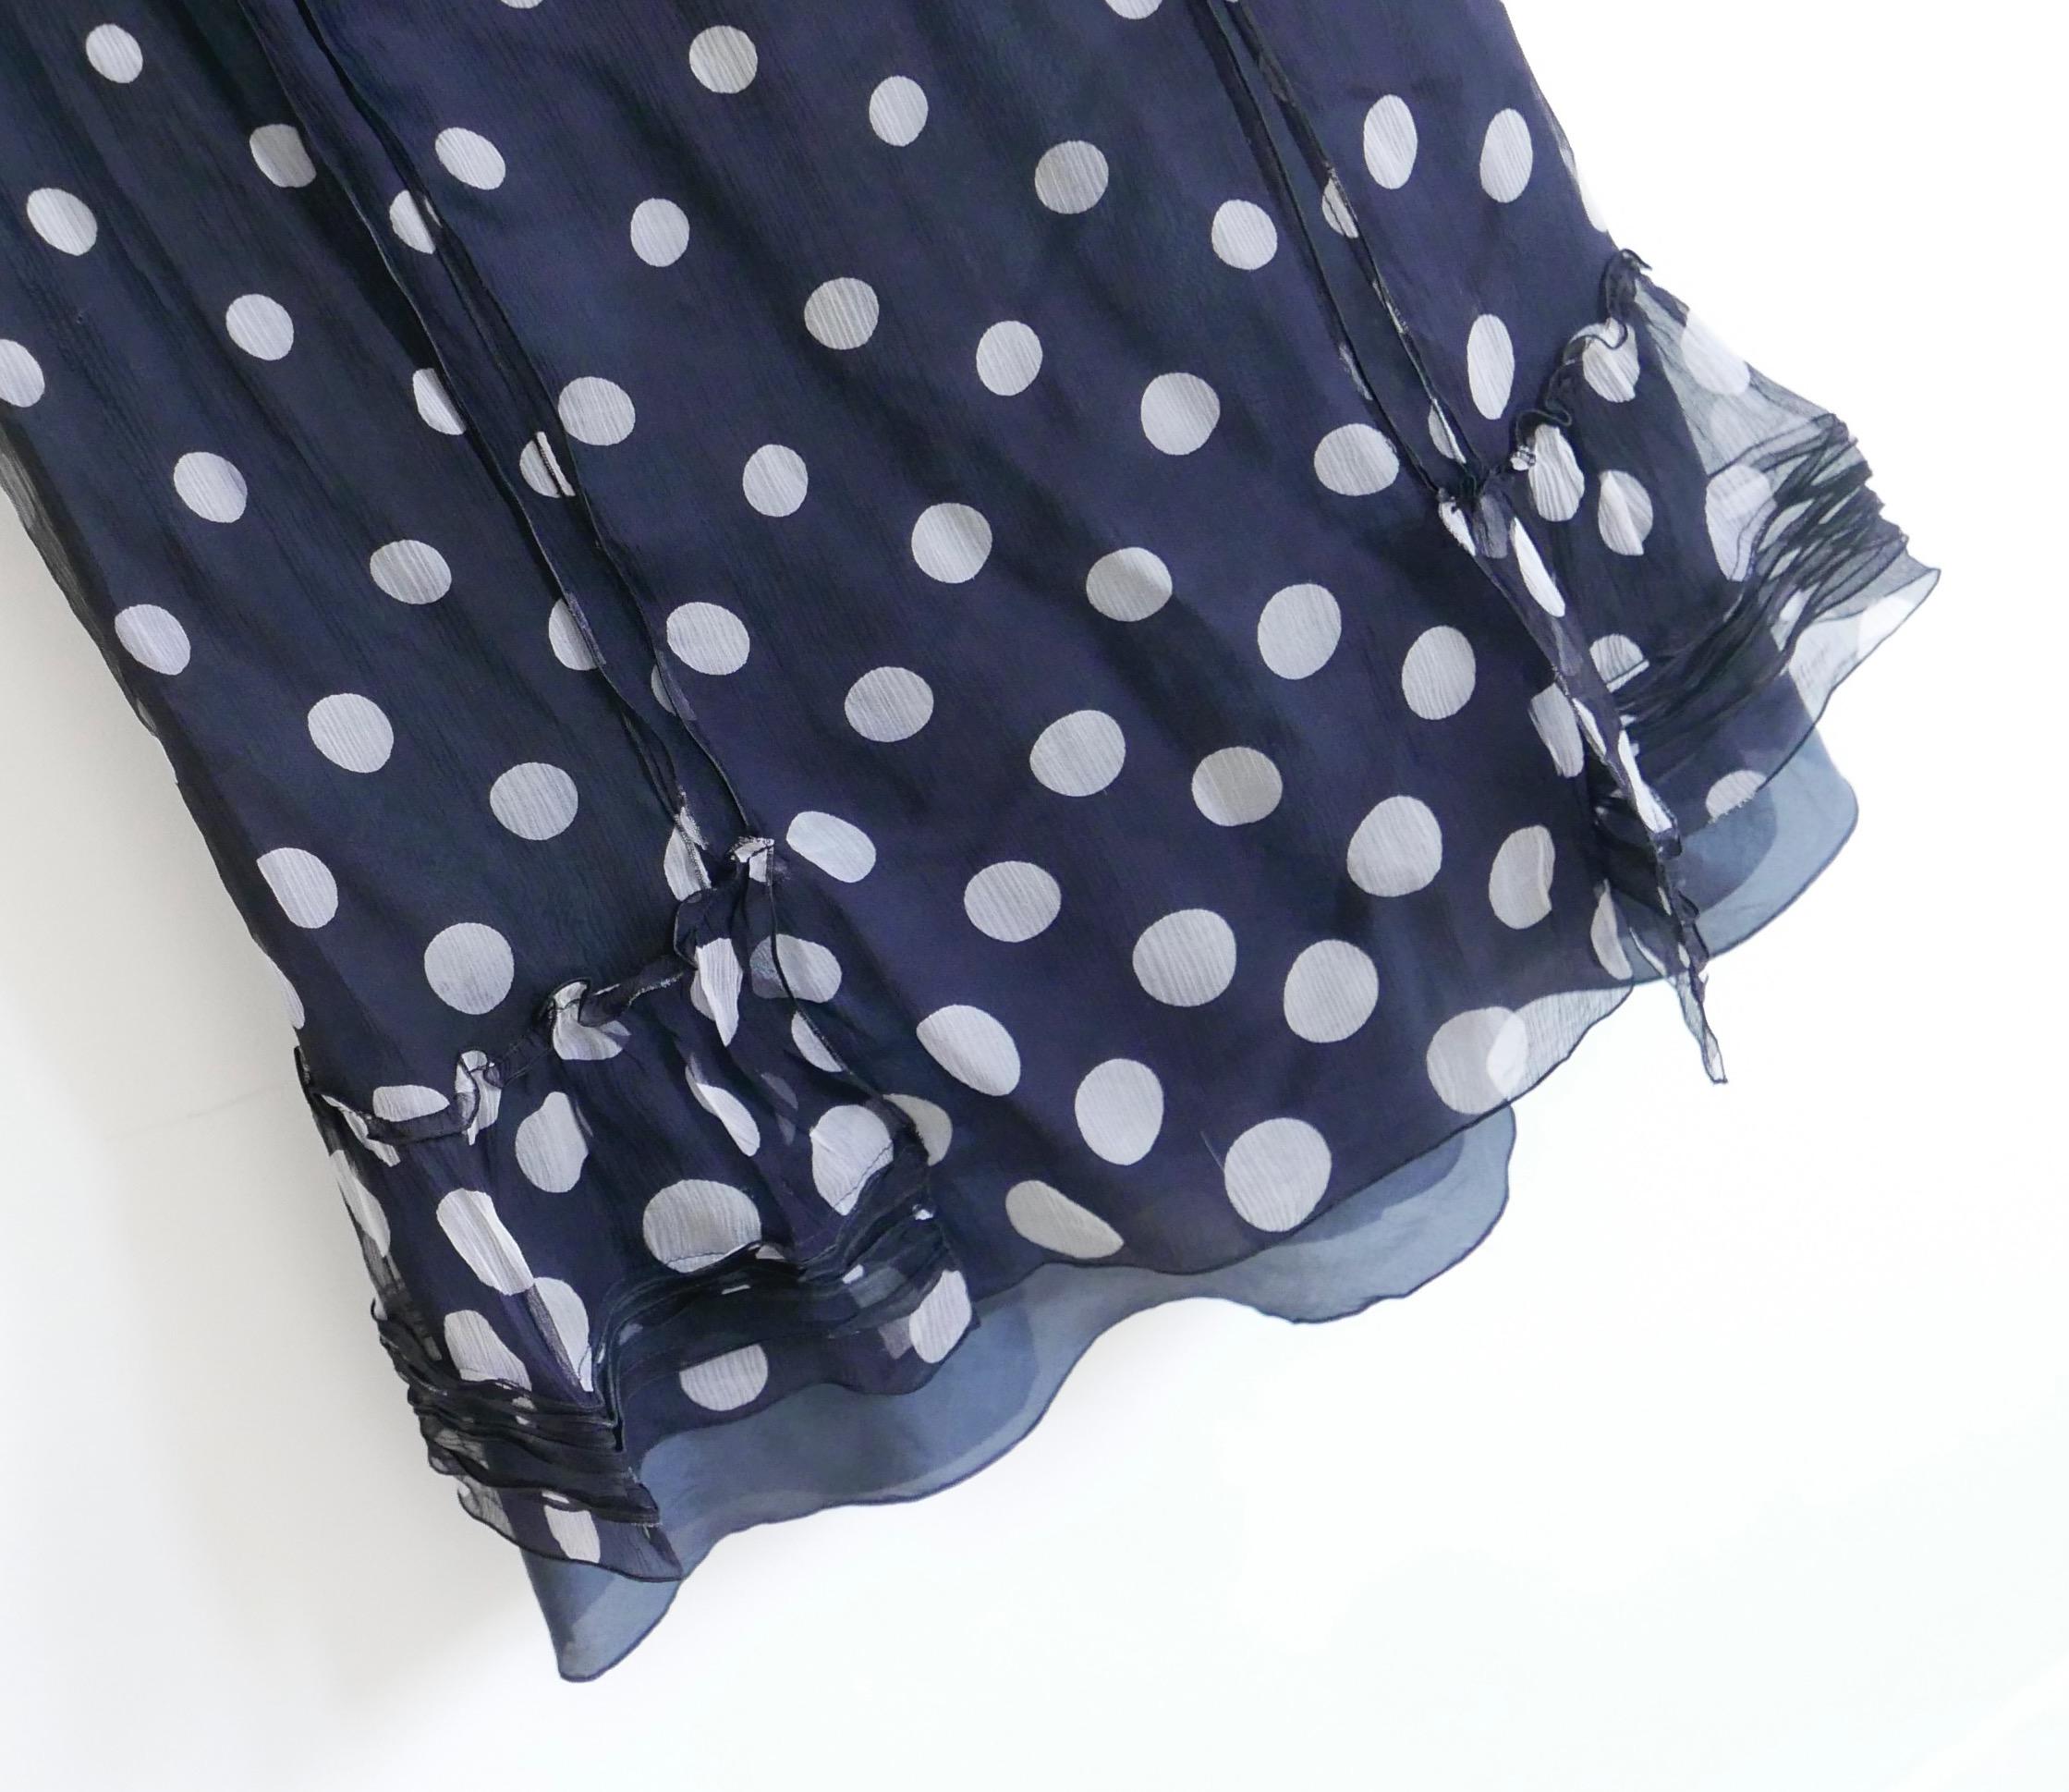 Miu Miu Vintage 90s Polka Dot Silk Tea Dress In Excellent Condition For Sale In London, GB